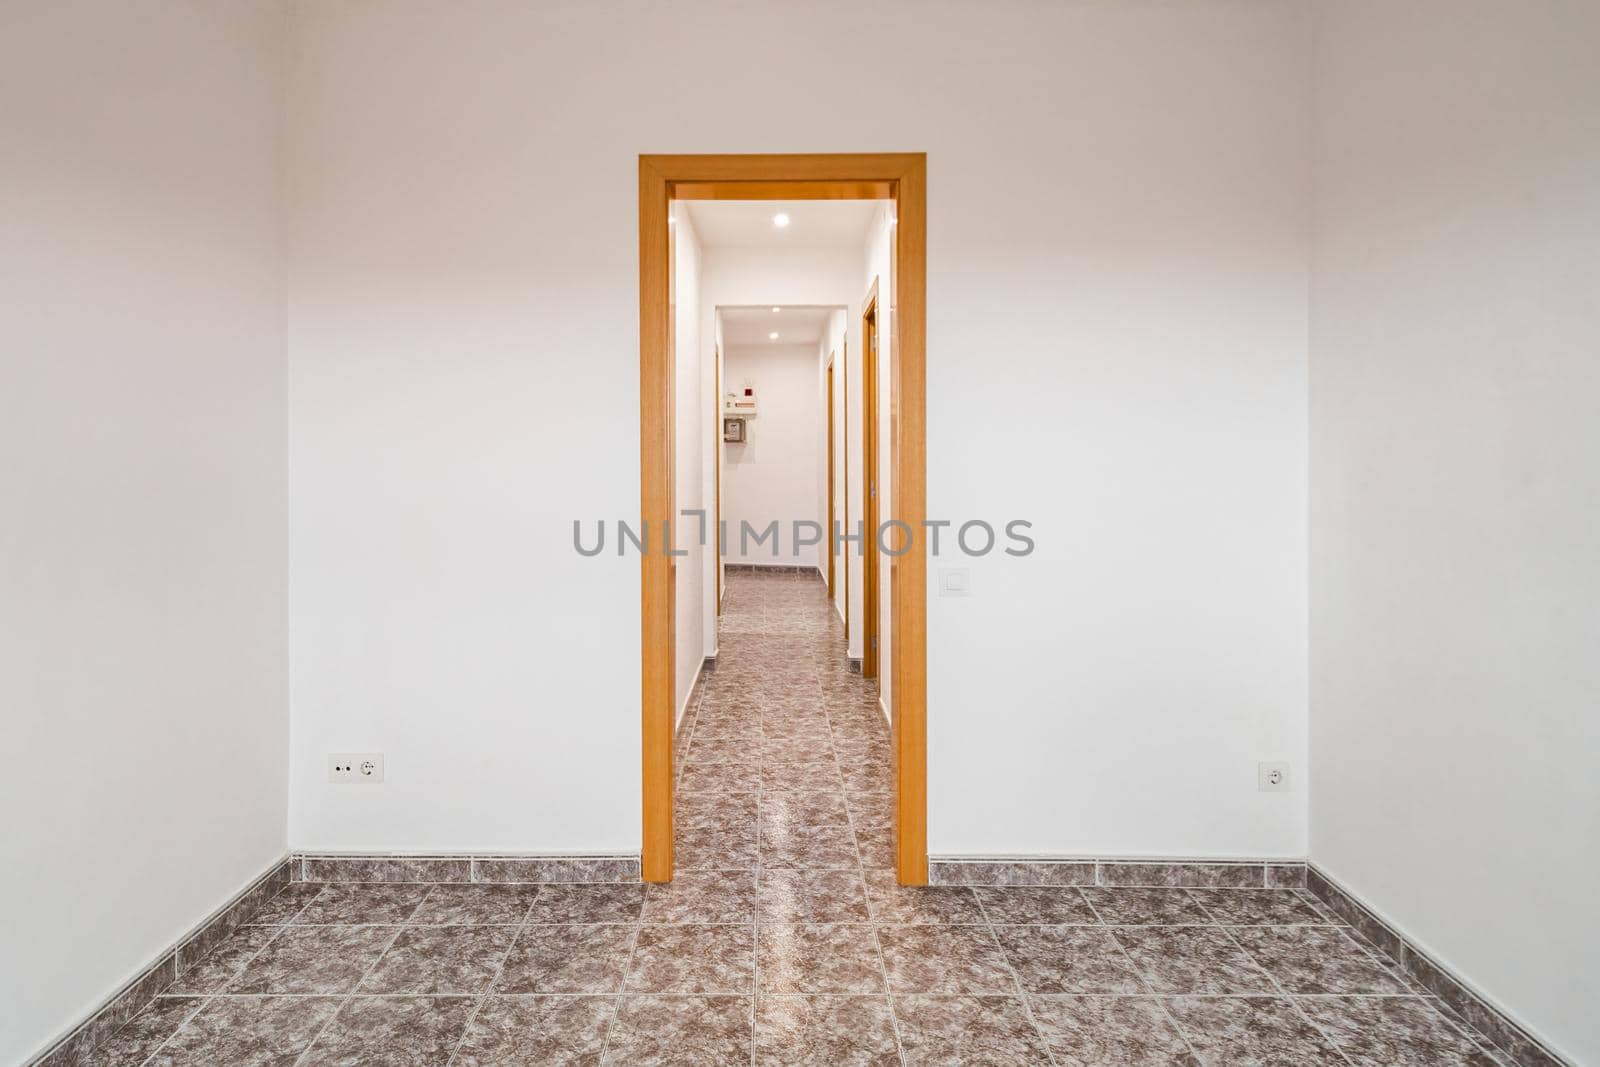 Empty room in apartment with long corridor, tiled floor and white walls.